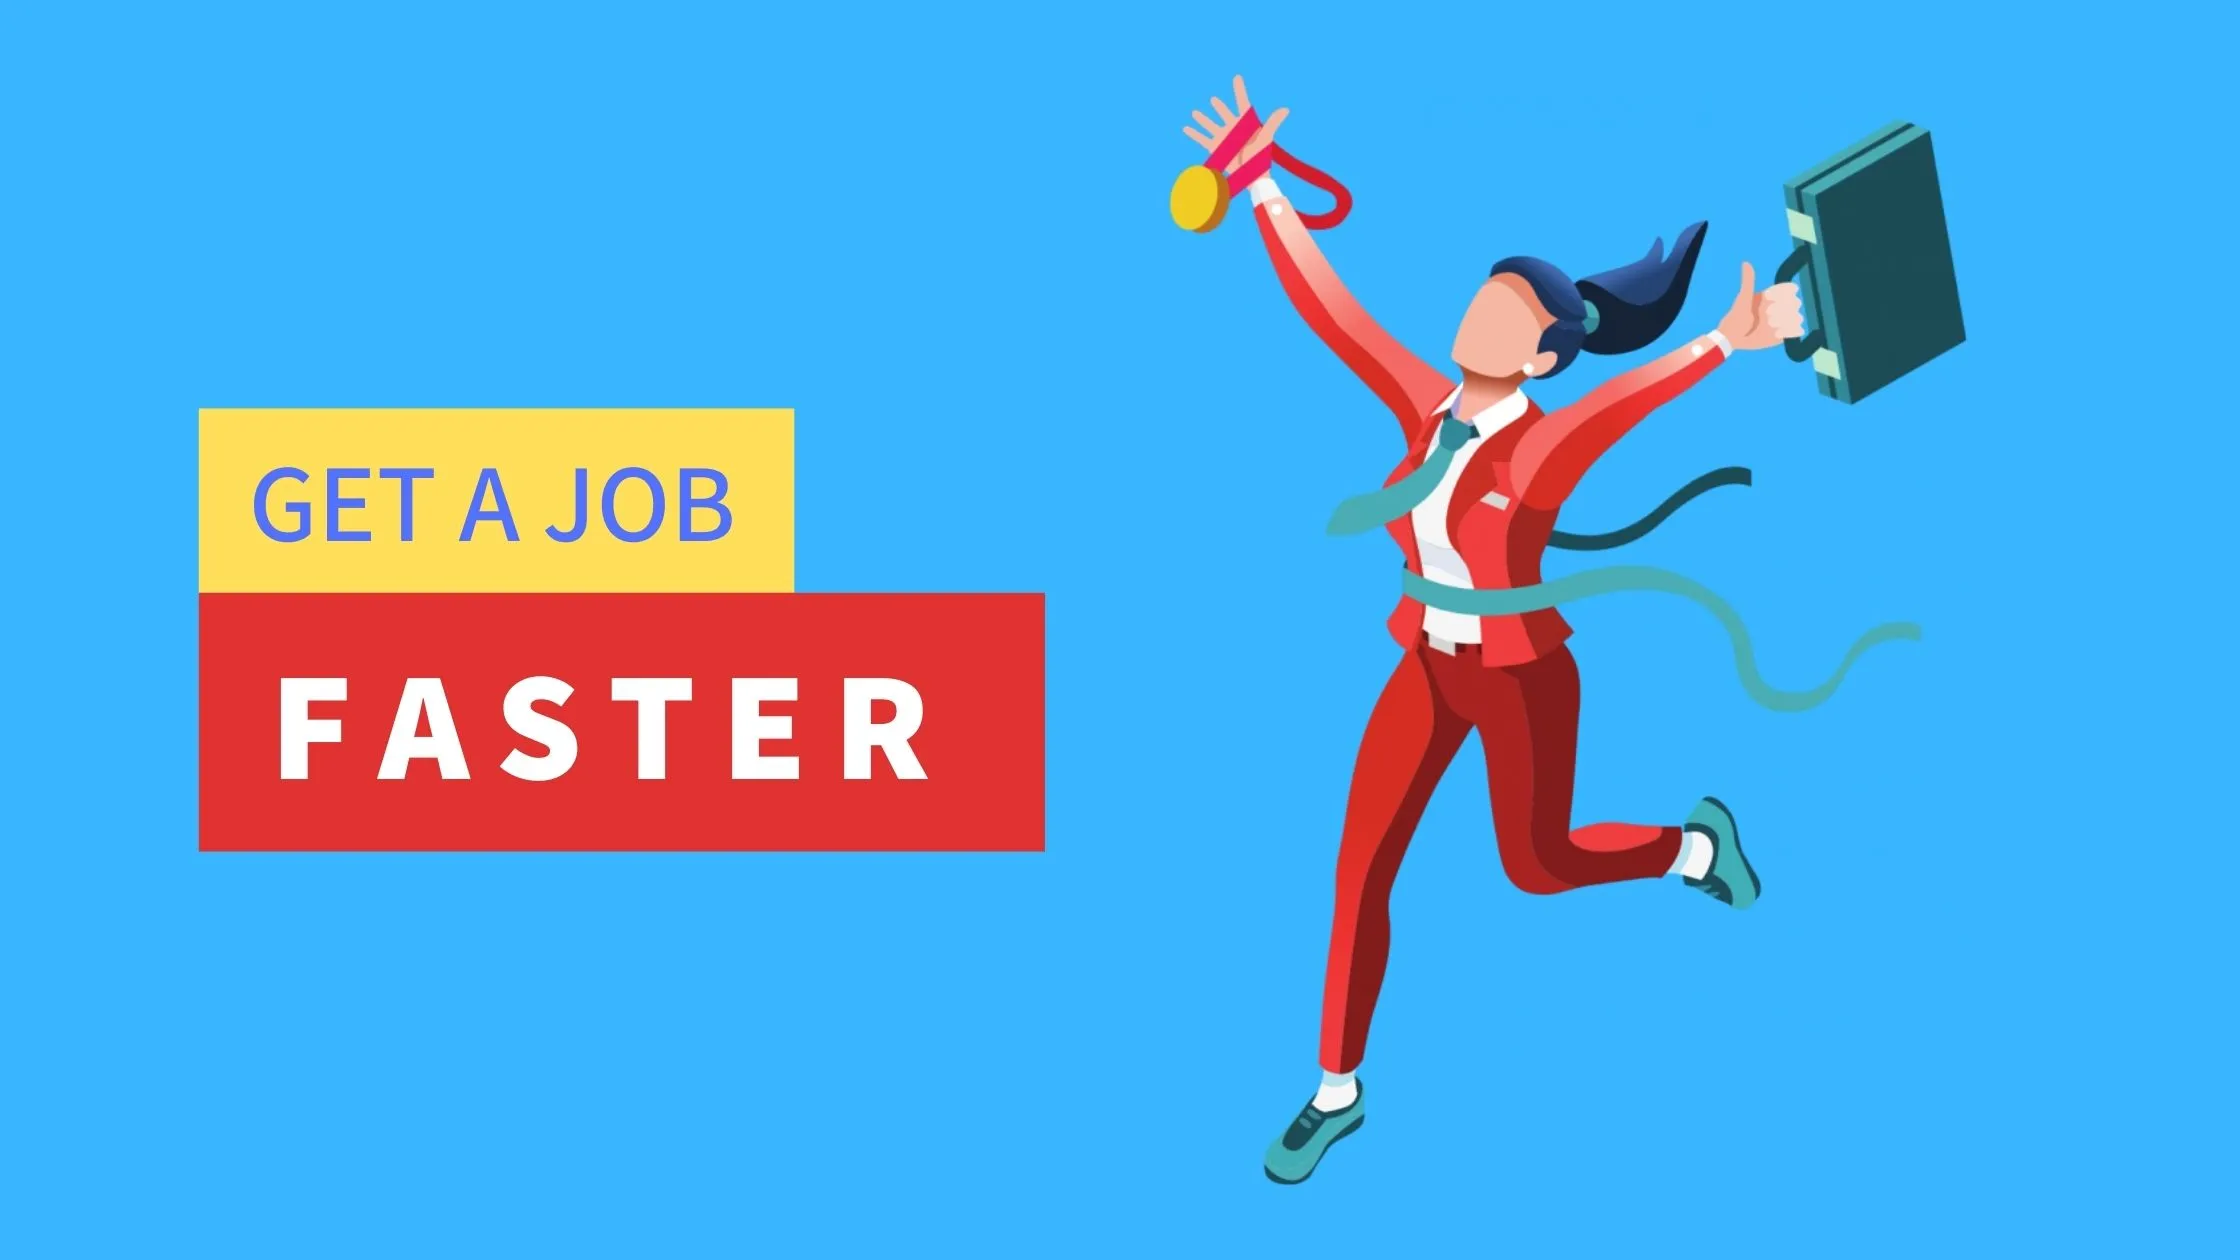 6 ways to get a job significantly faster